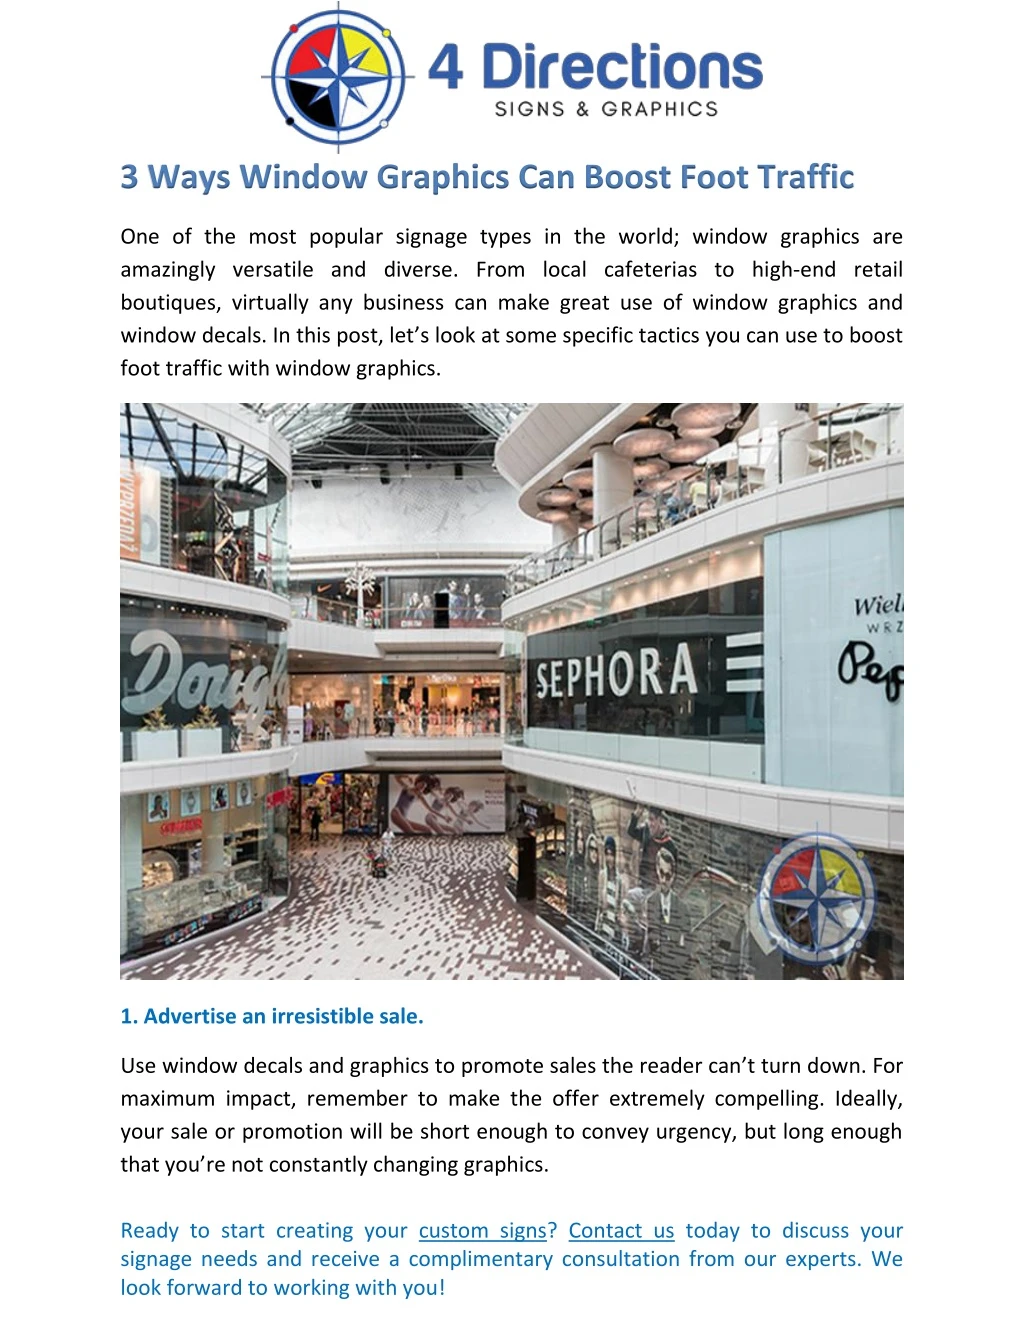 3 ways window graphics can boost foot traffic